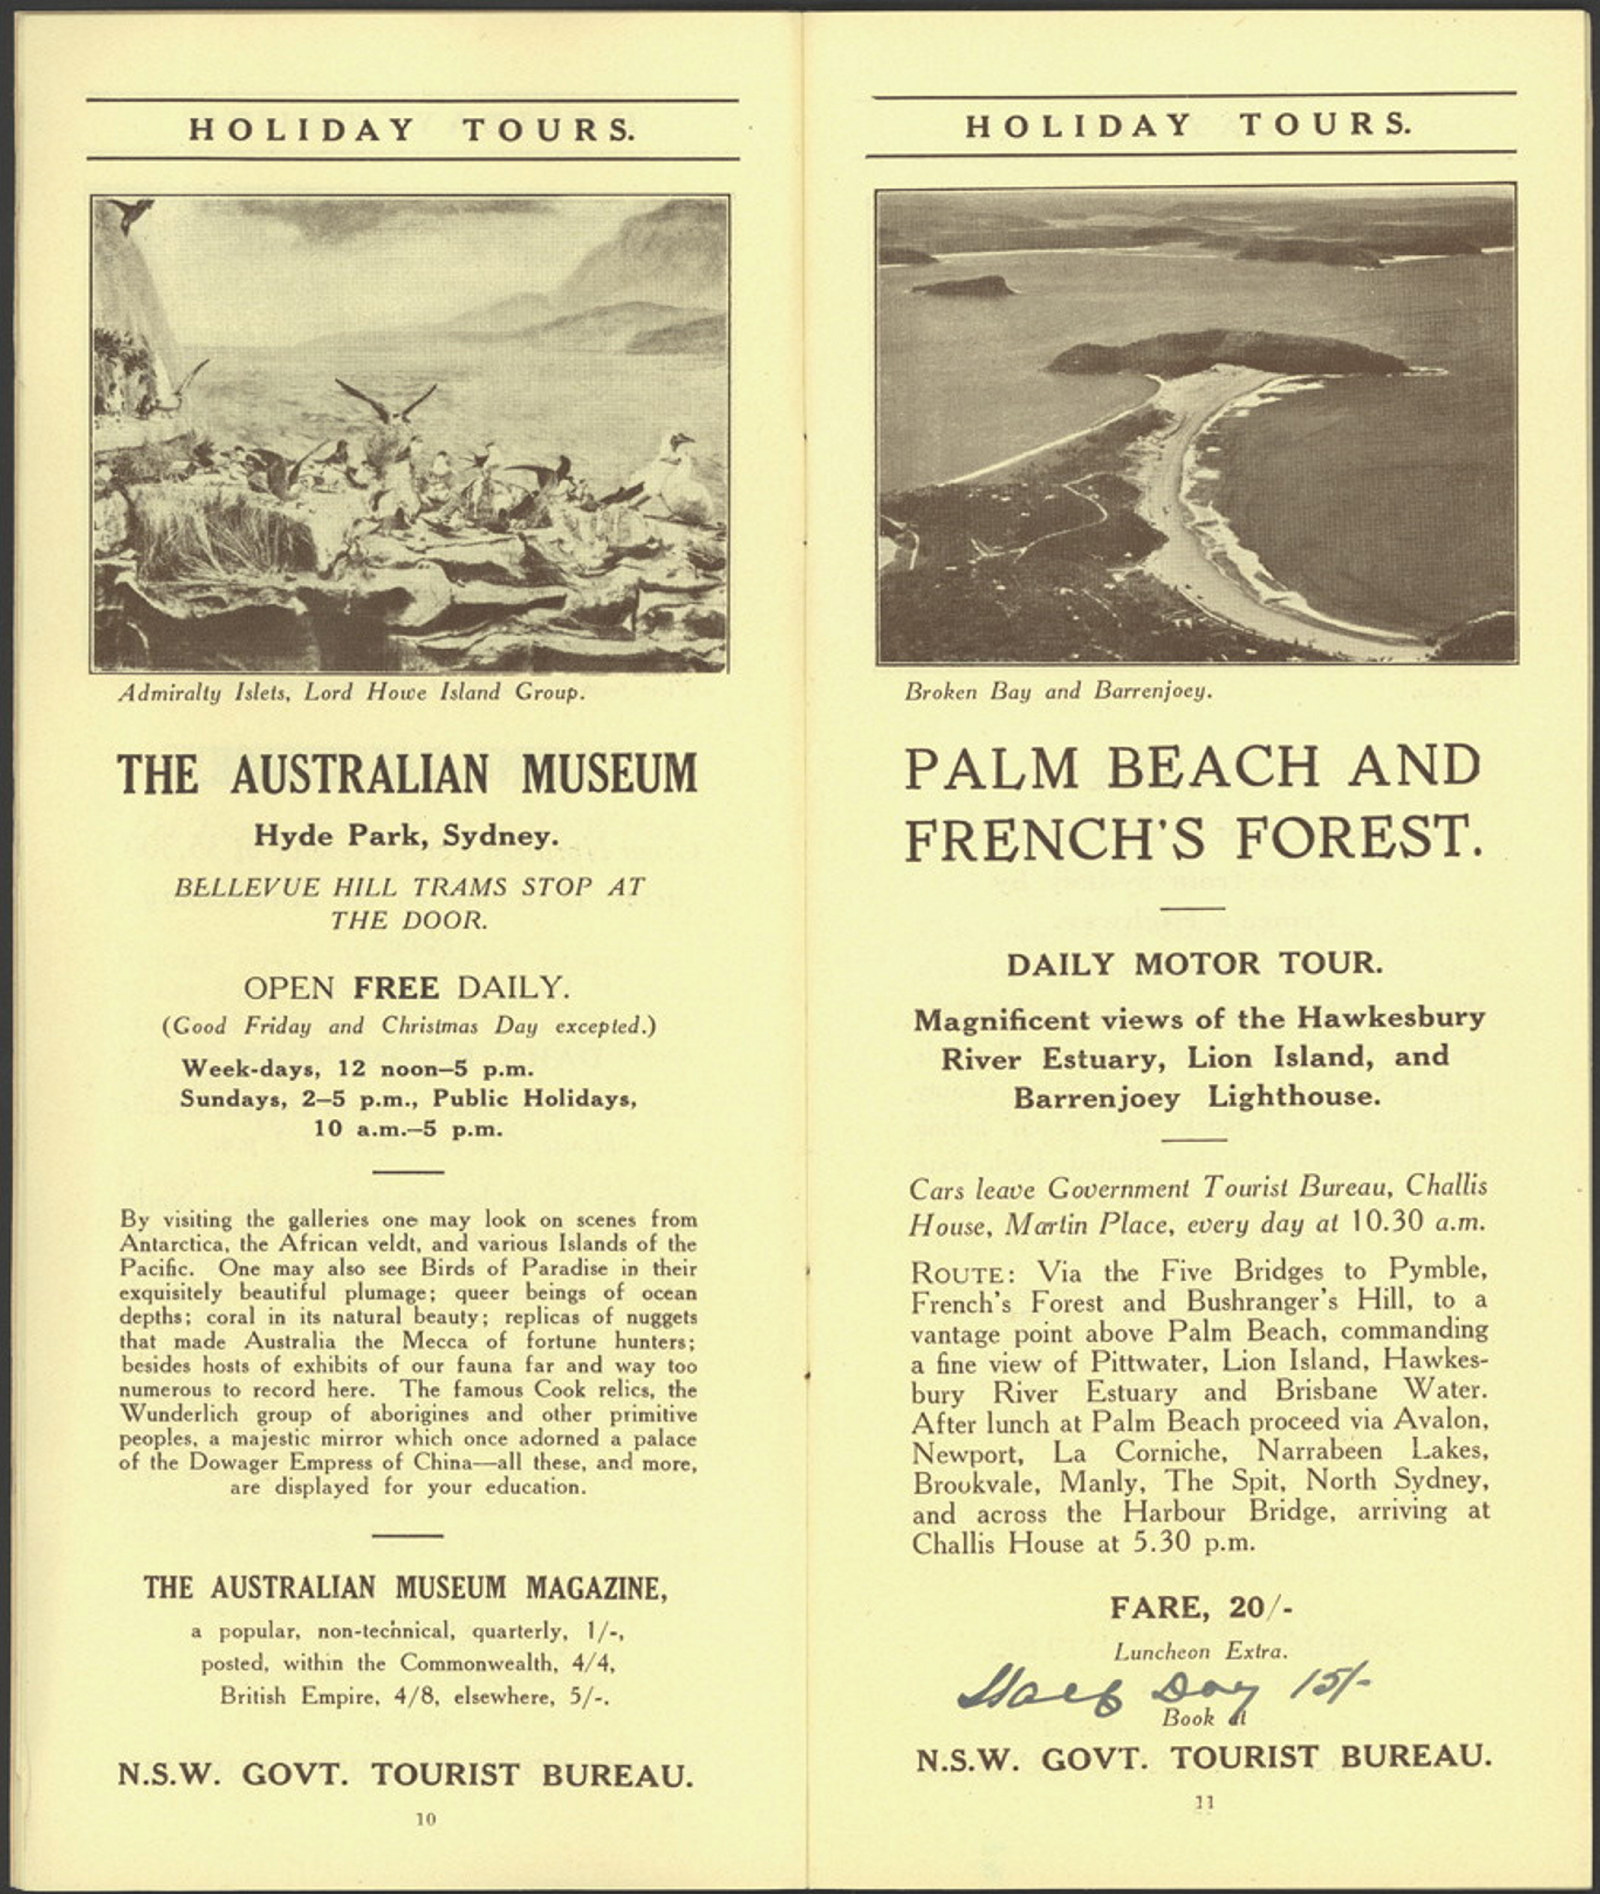 Pages 10 - The Australian Museum. Page 11 - Palm Beach and French's Forest. Daily Motor Tour. Magnificent views of the Hawkesbury, Lion Island, and Barrenjoey Lighthouse. Photo of Broken Bay and Barrenjoey. Digital ID 16410_a111_11a_000022_p10-11